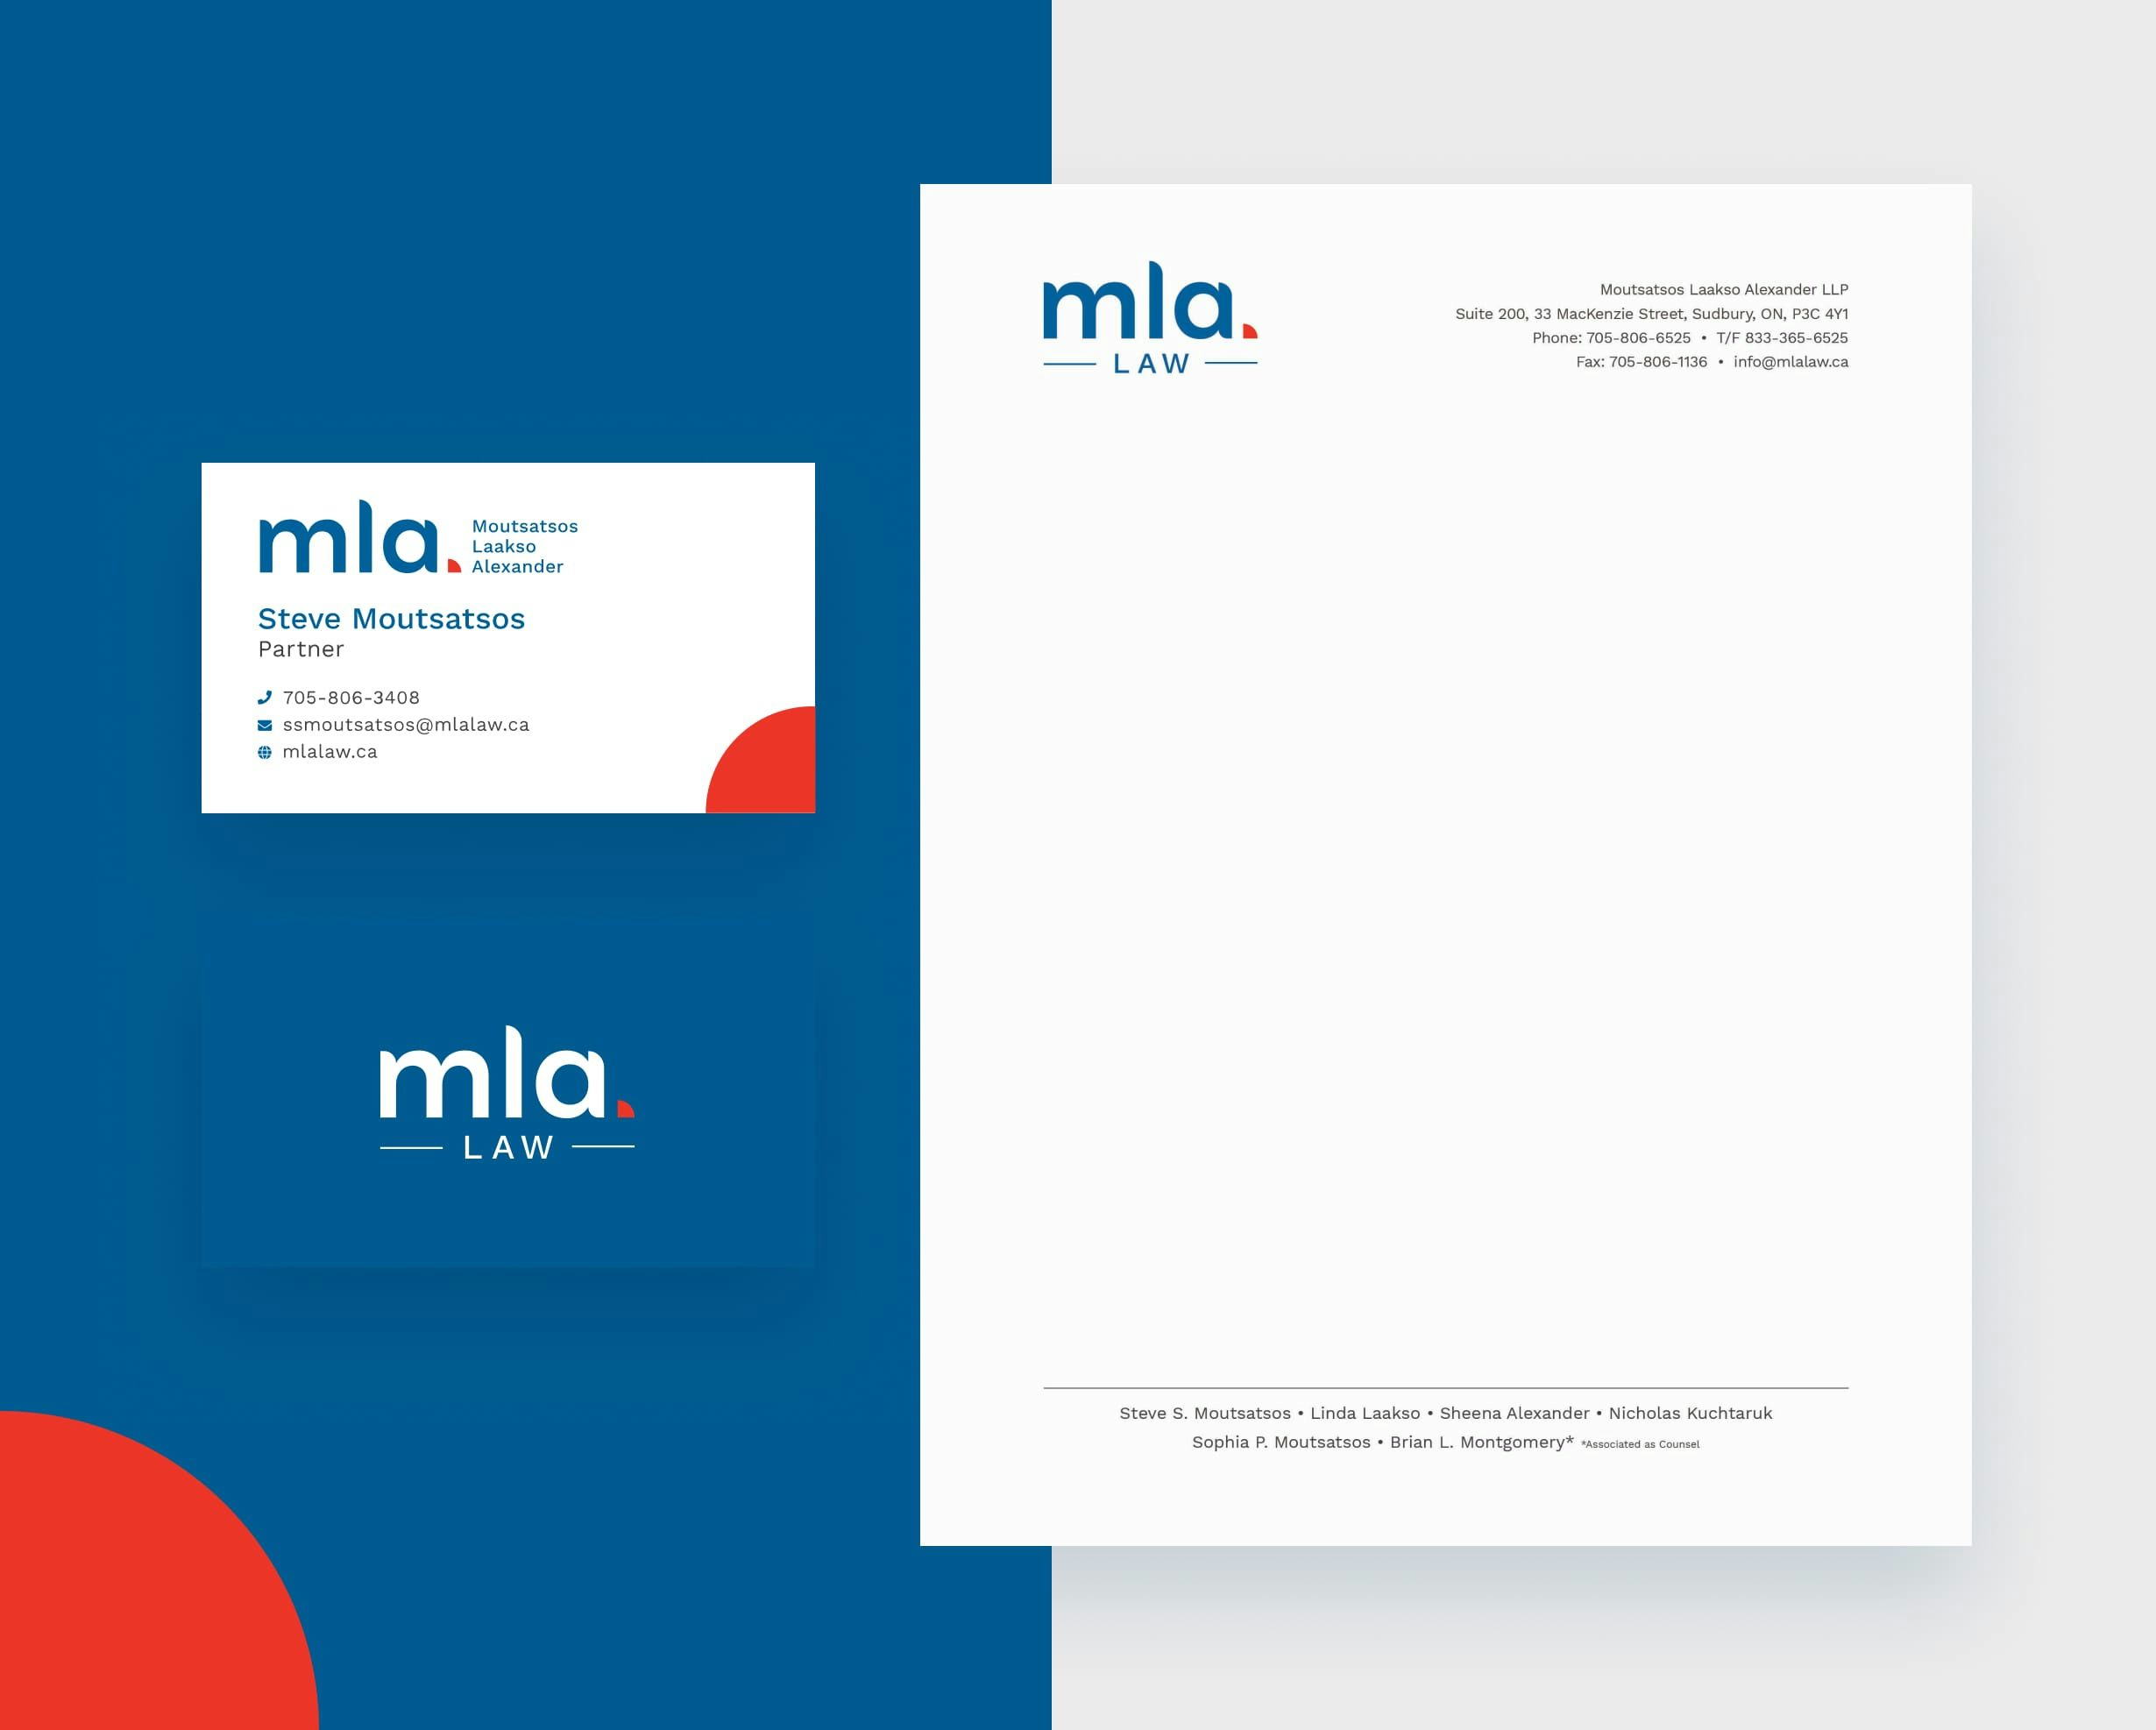 Branded business cards and letterhead for MLA Law